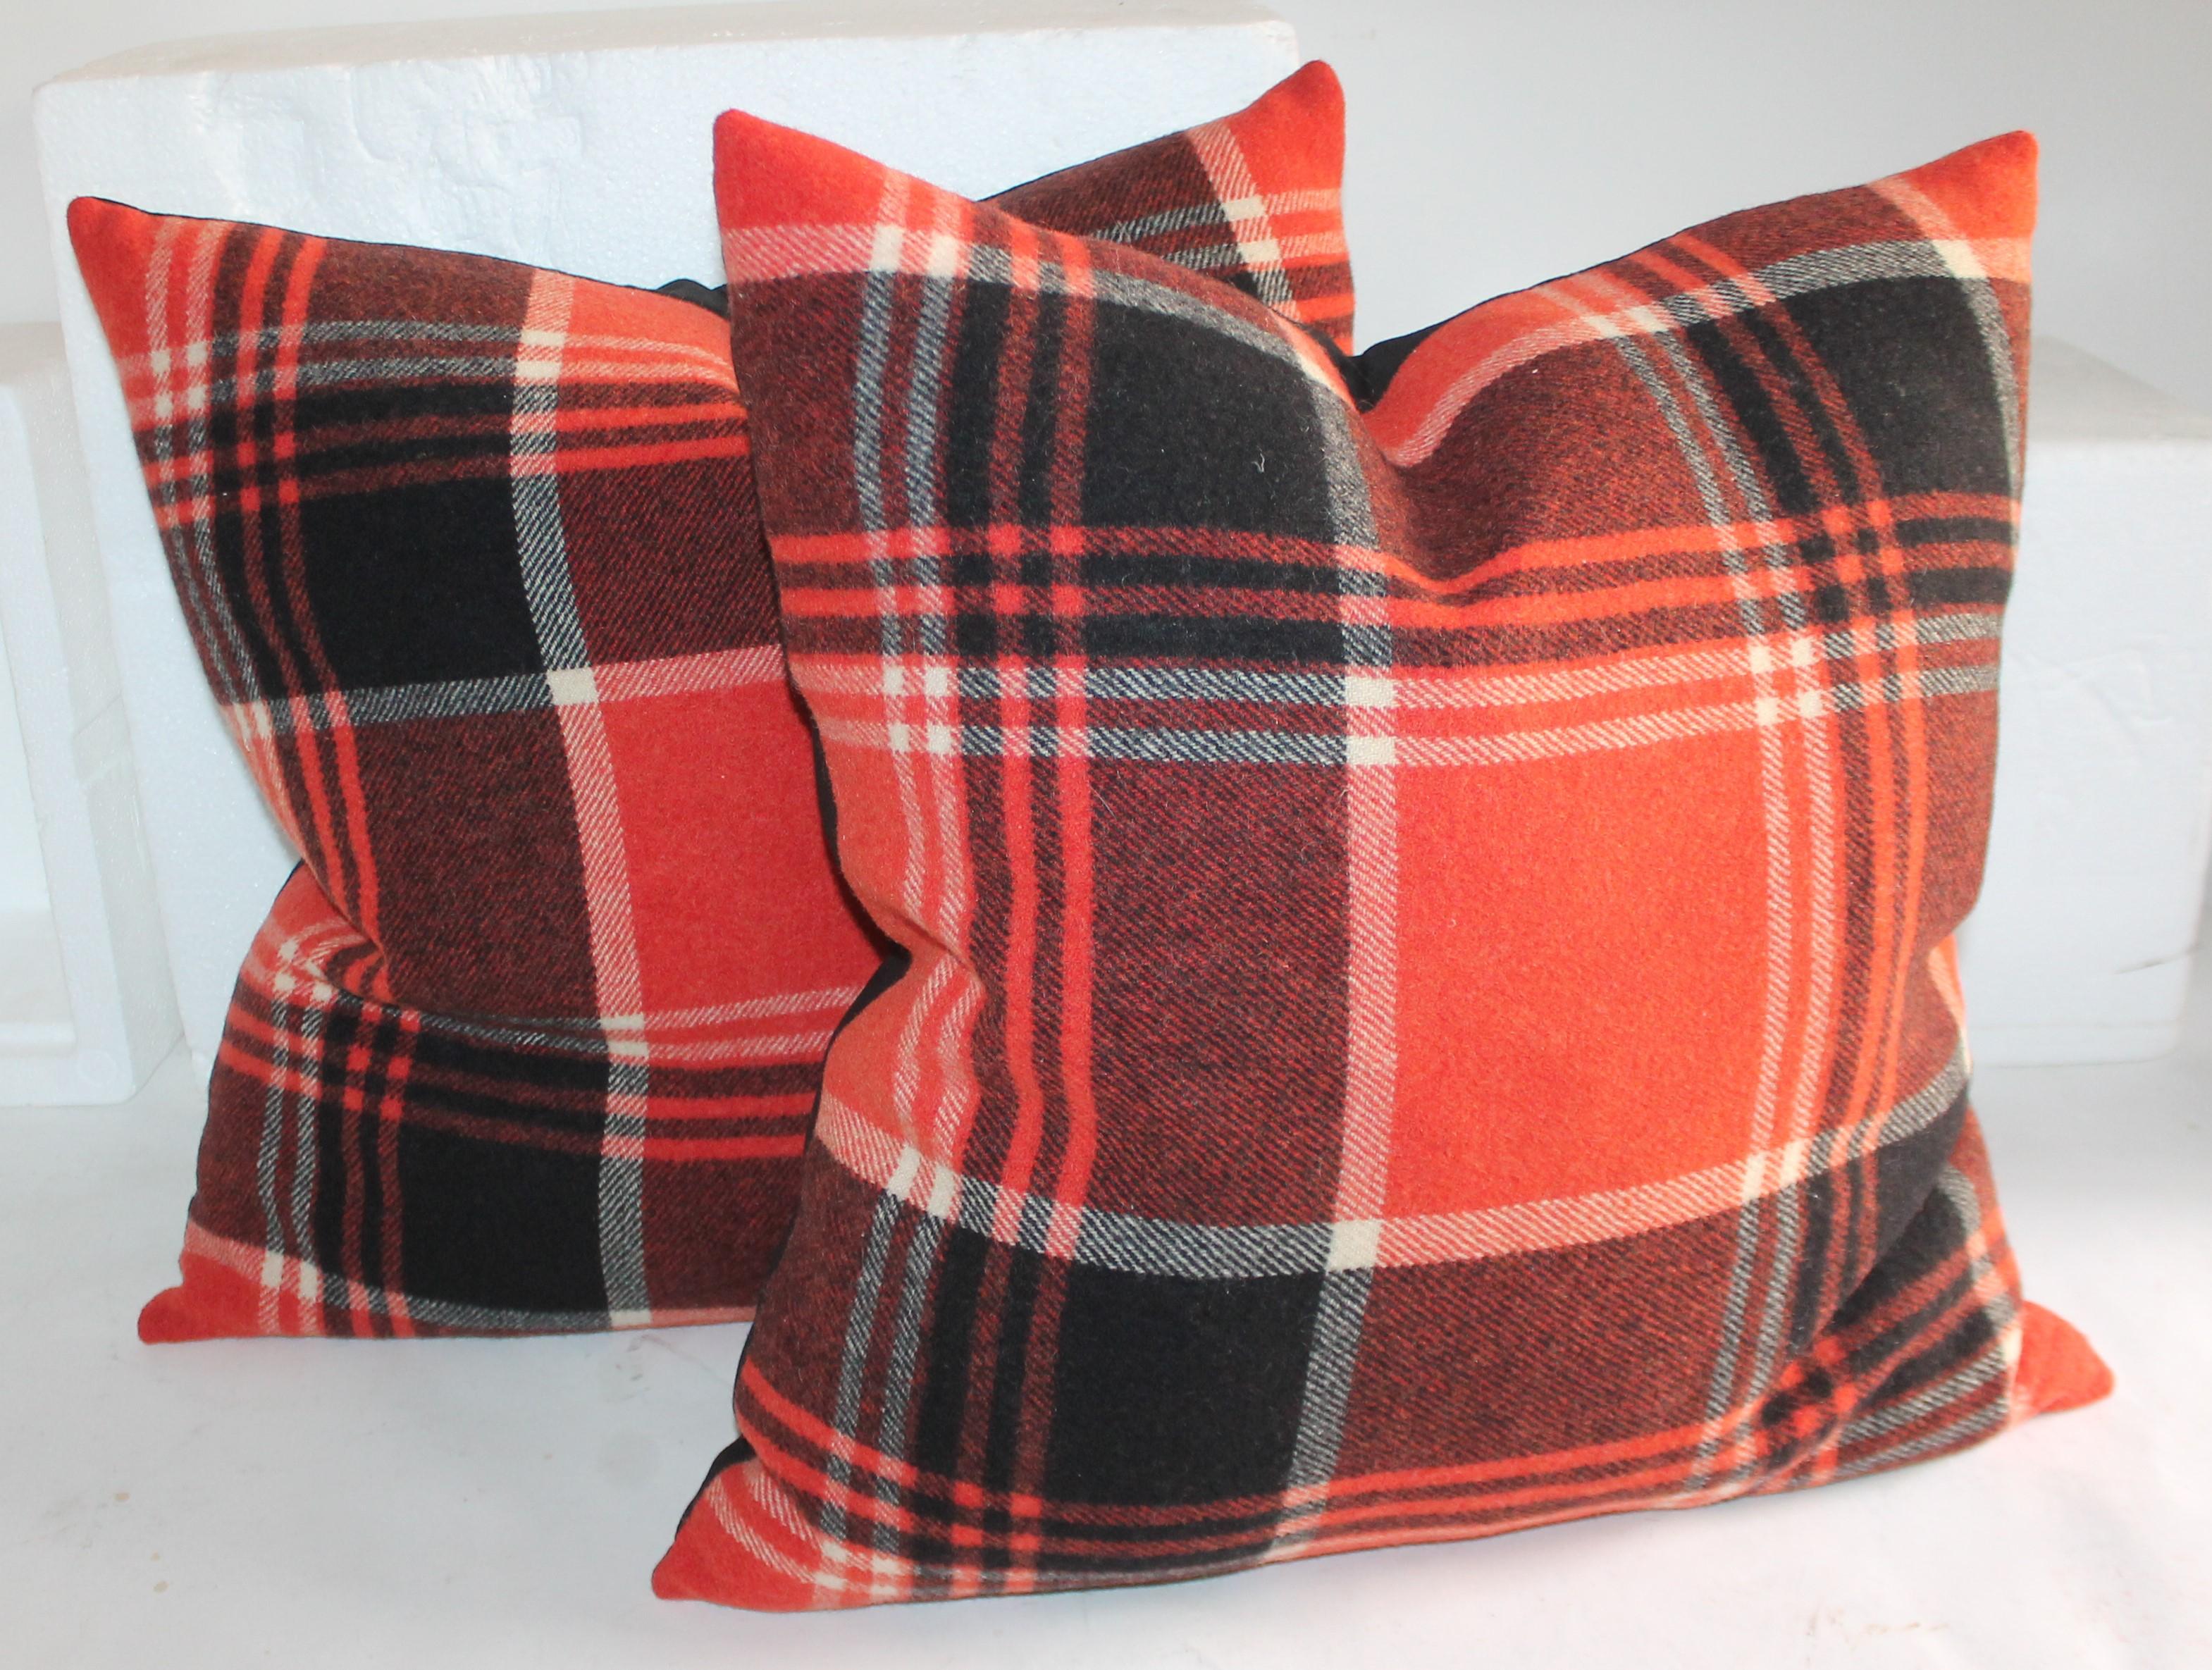 American Collection of Four Plaid Blanket Pillows